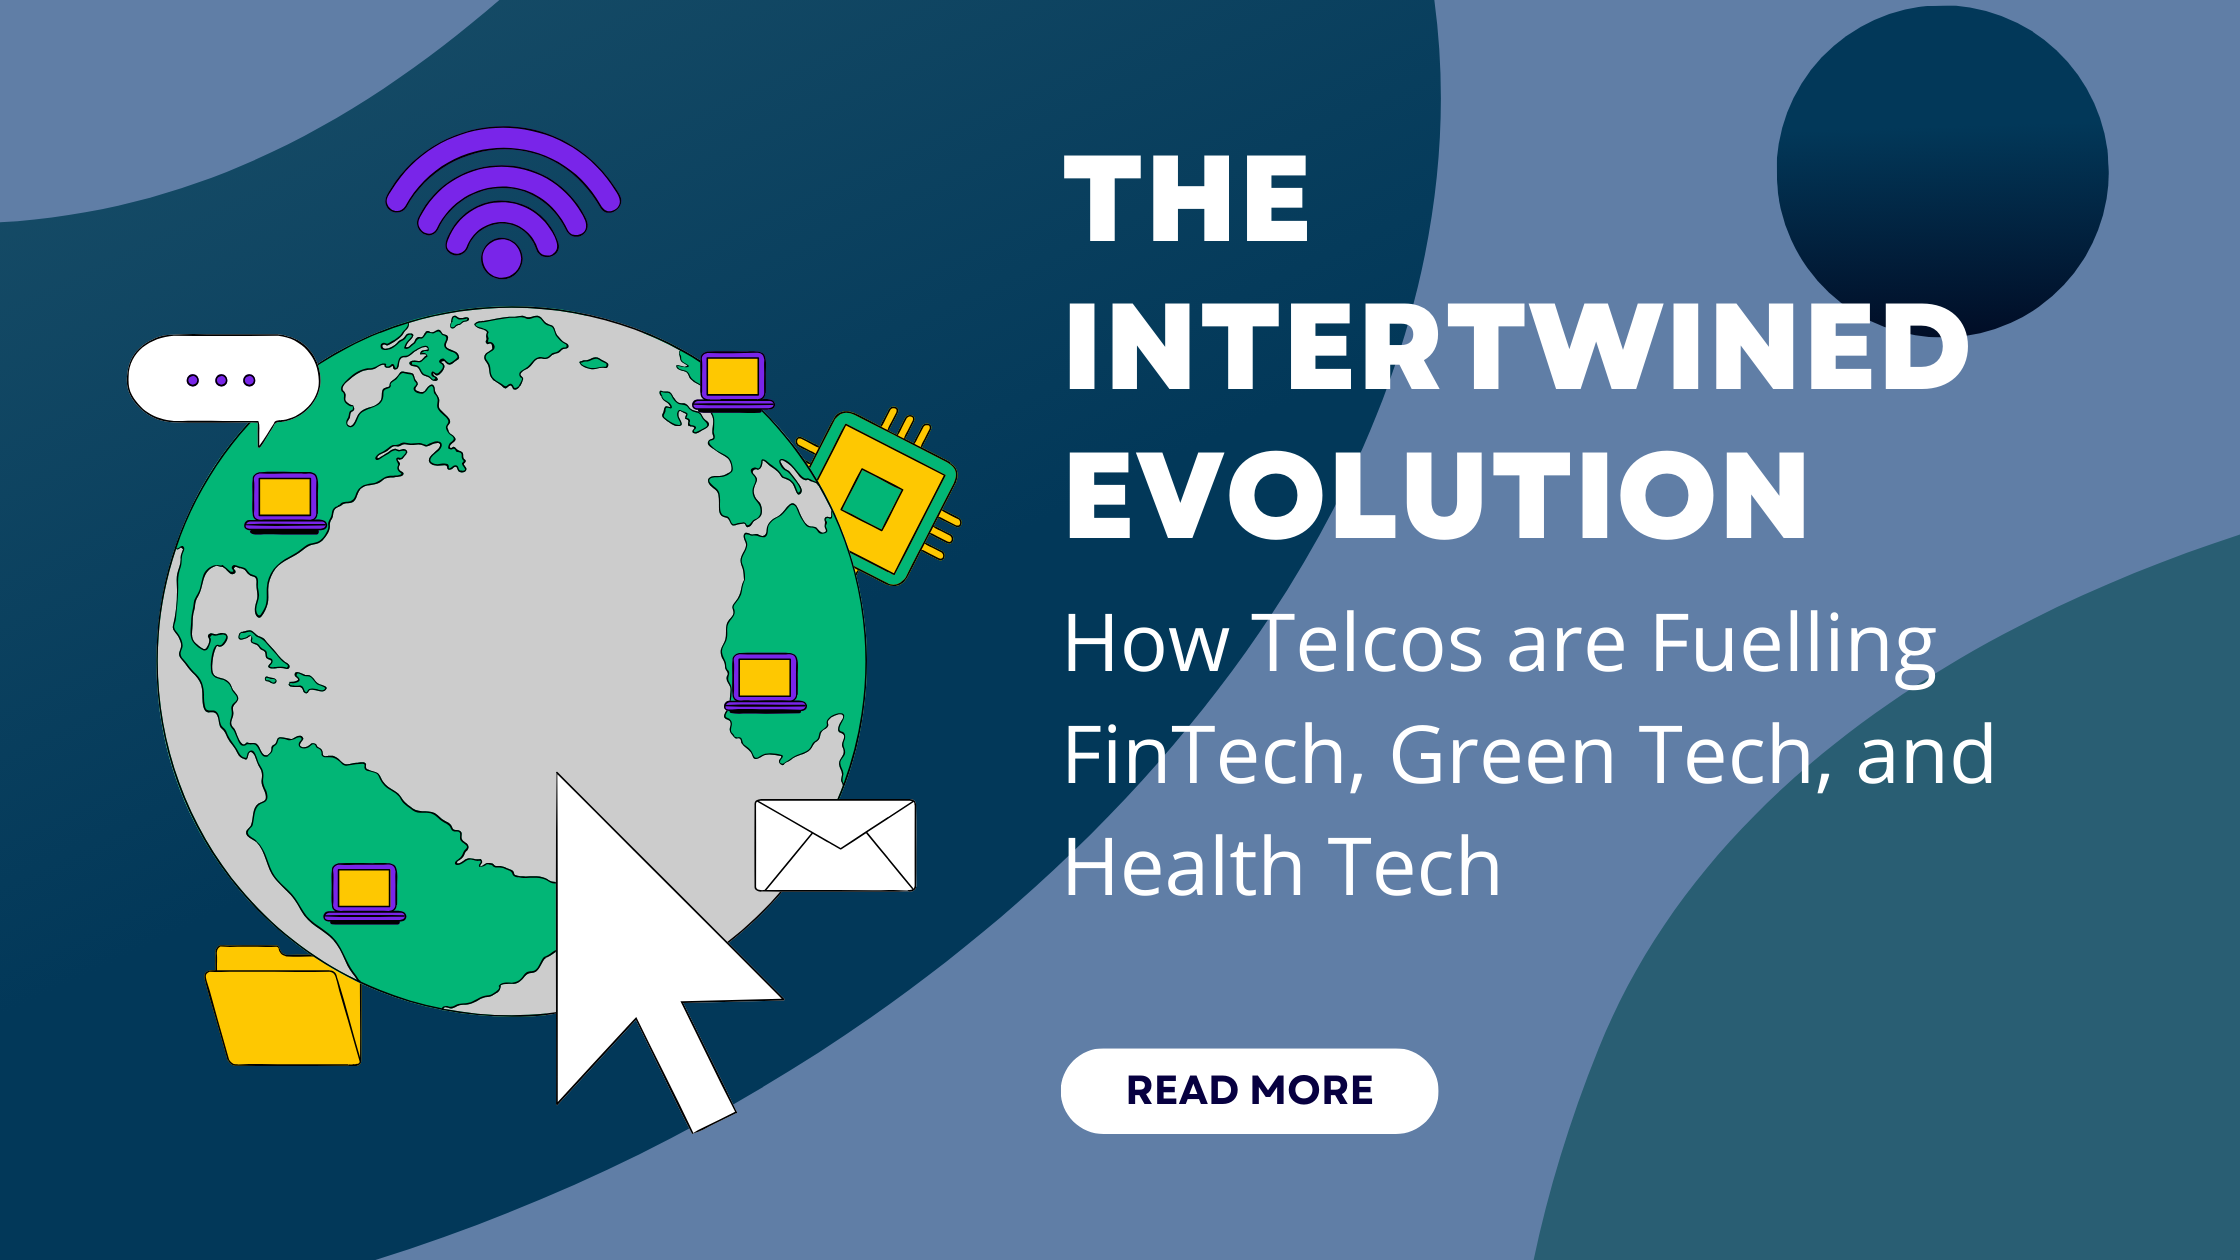 The Intertwined Evolution: How Telcos are Fuelling FinTech, Green Tech, and Health Tech